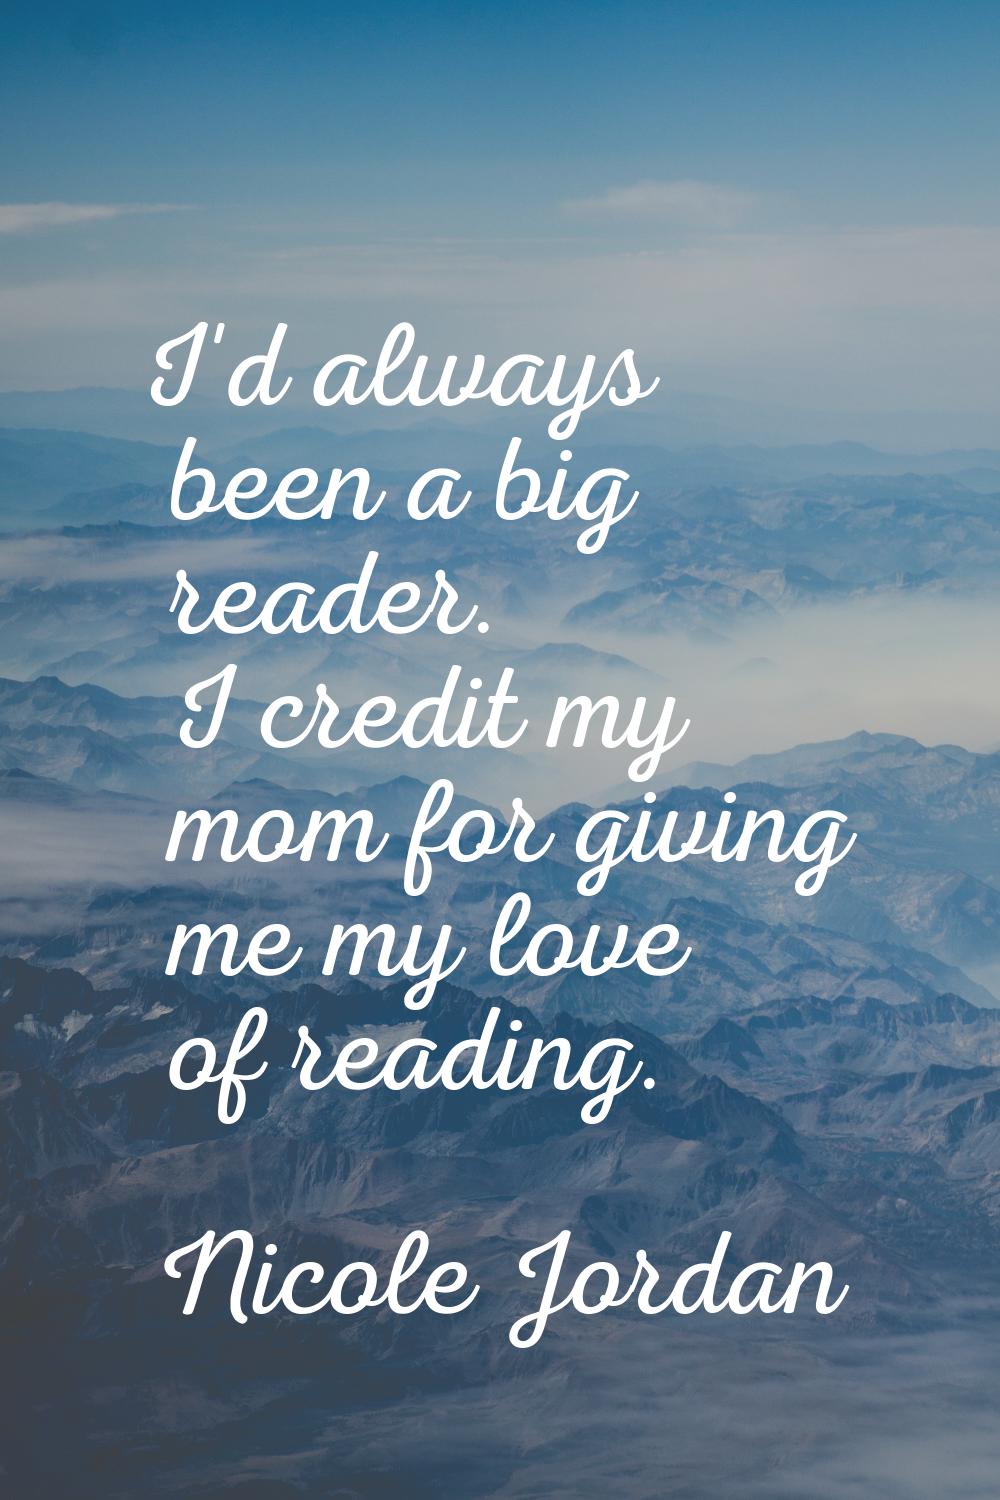 I'd always been a big reader. I credit my mom for giving me my love of reading.